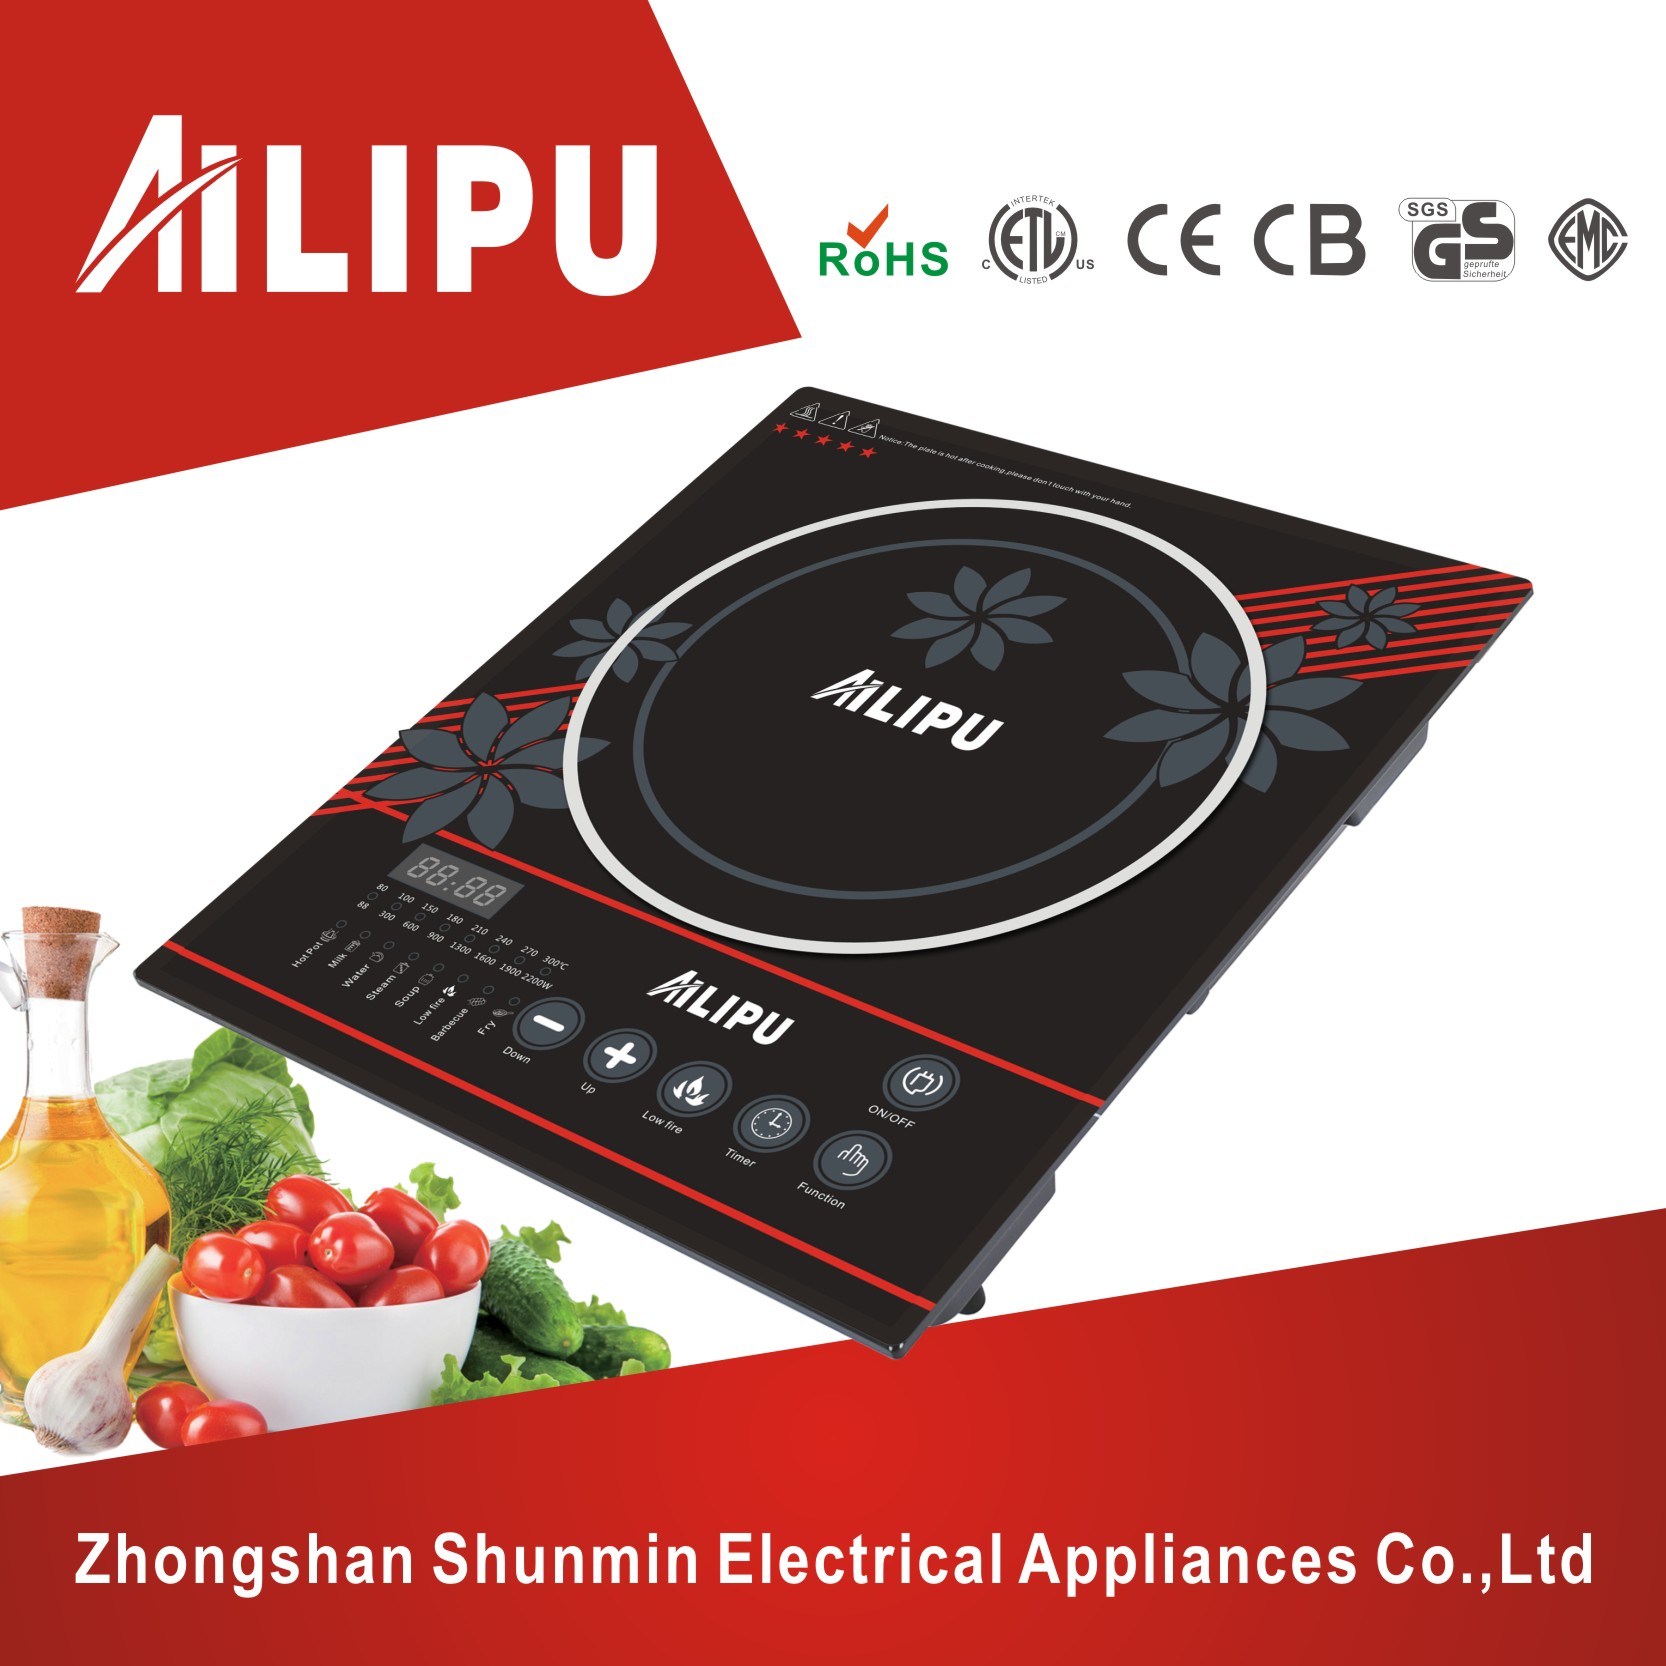 Touch Screen and Multifunctional Big Plate Colorful Induction Cooktop